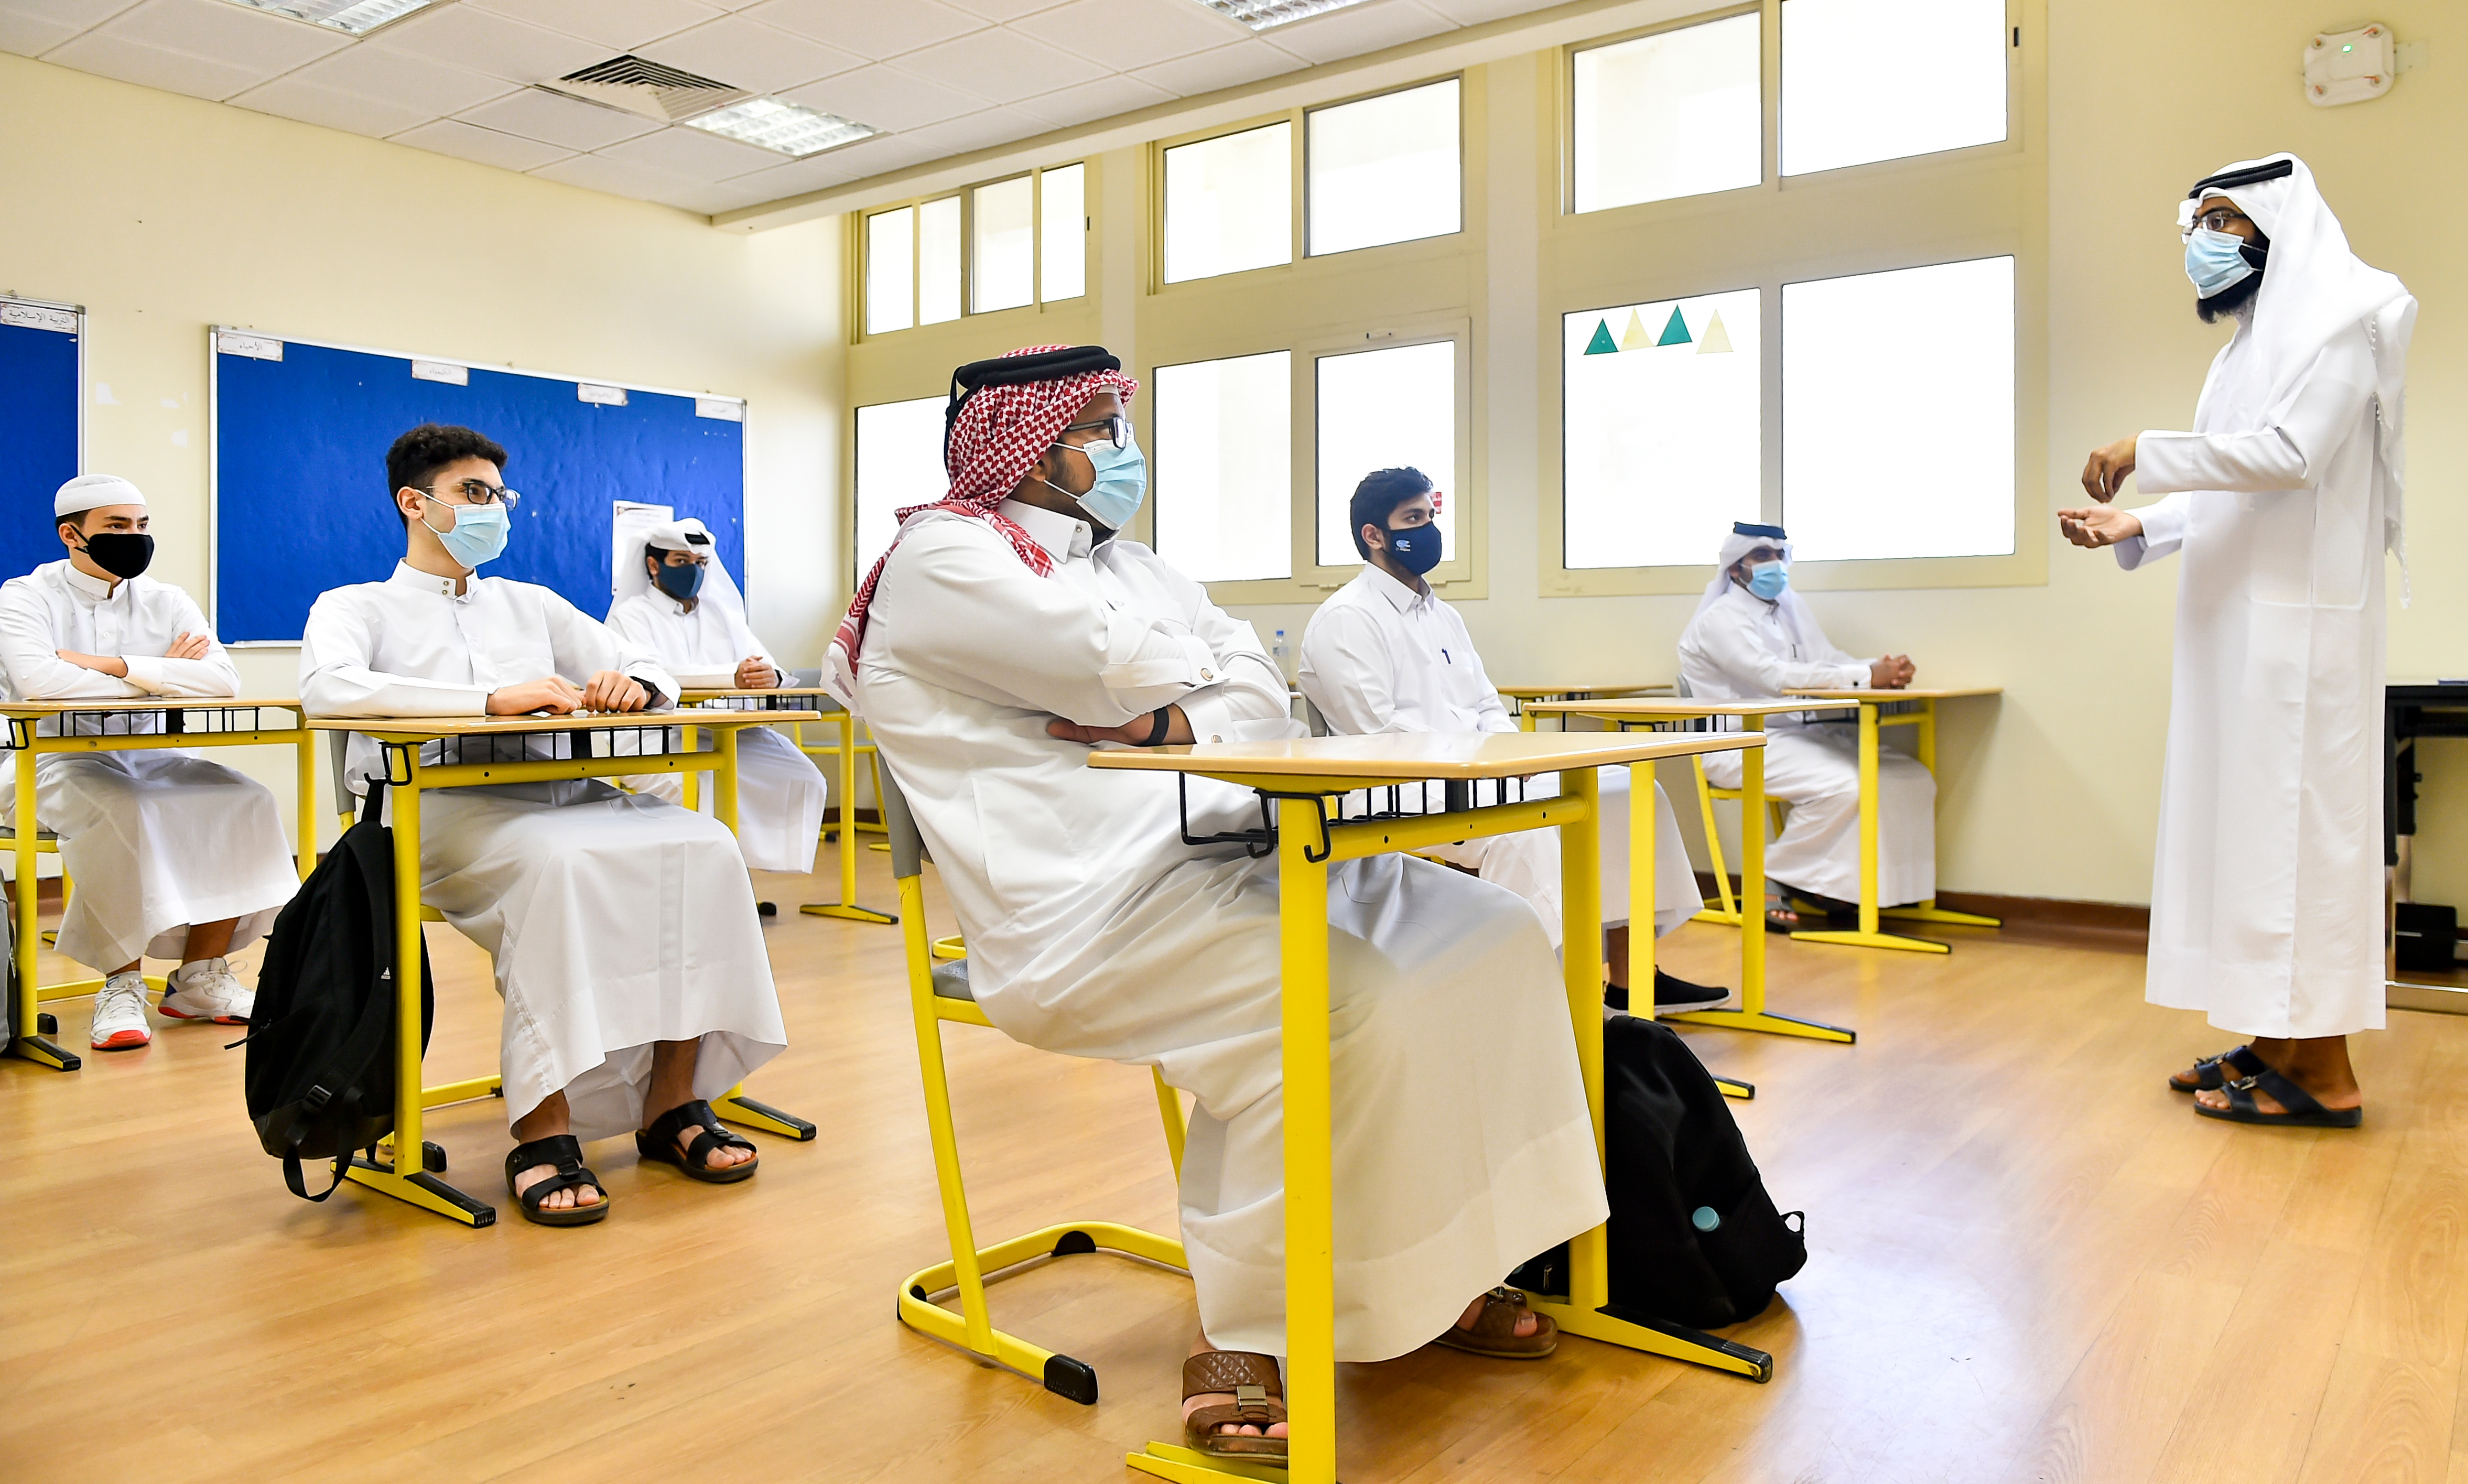 Students wear face masks and maintain social distance in a classroom on the first day of school at a Secondary School in Doha, Qatar.